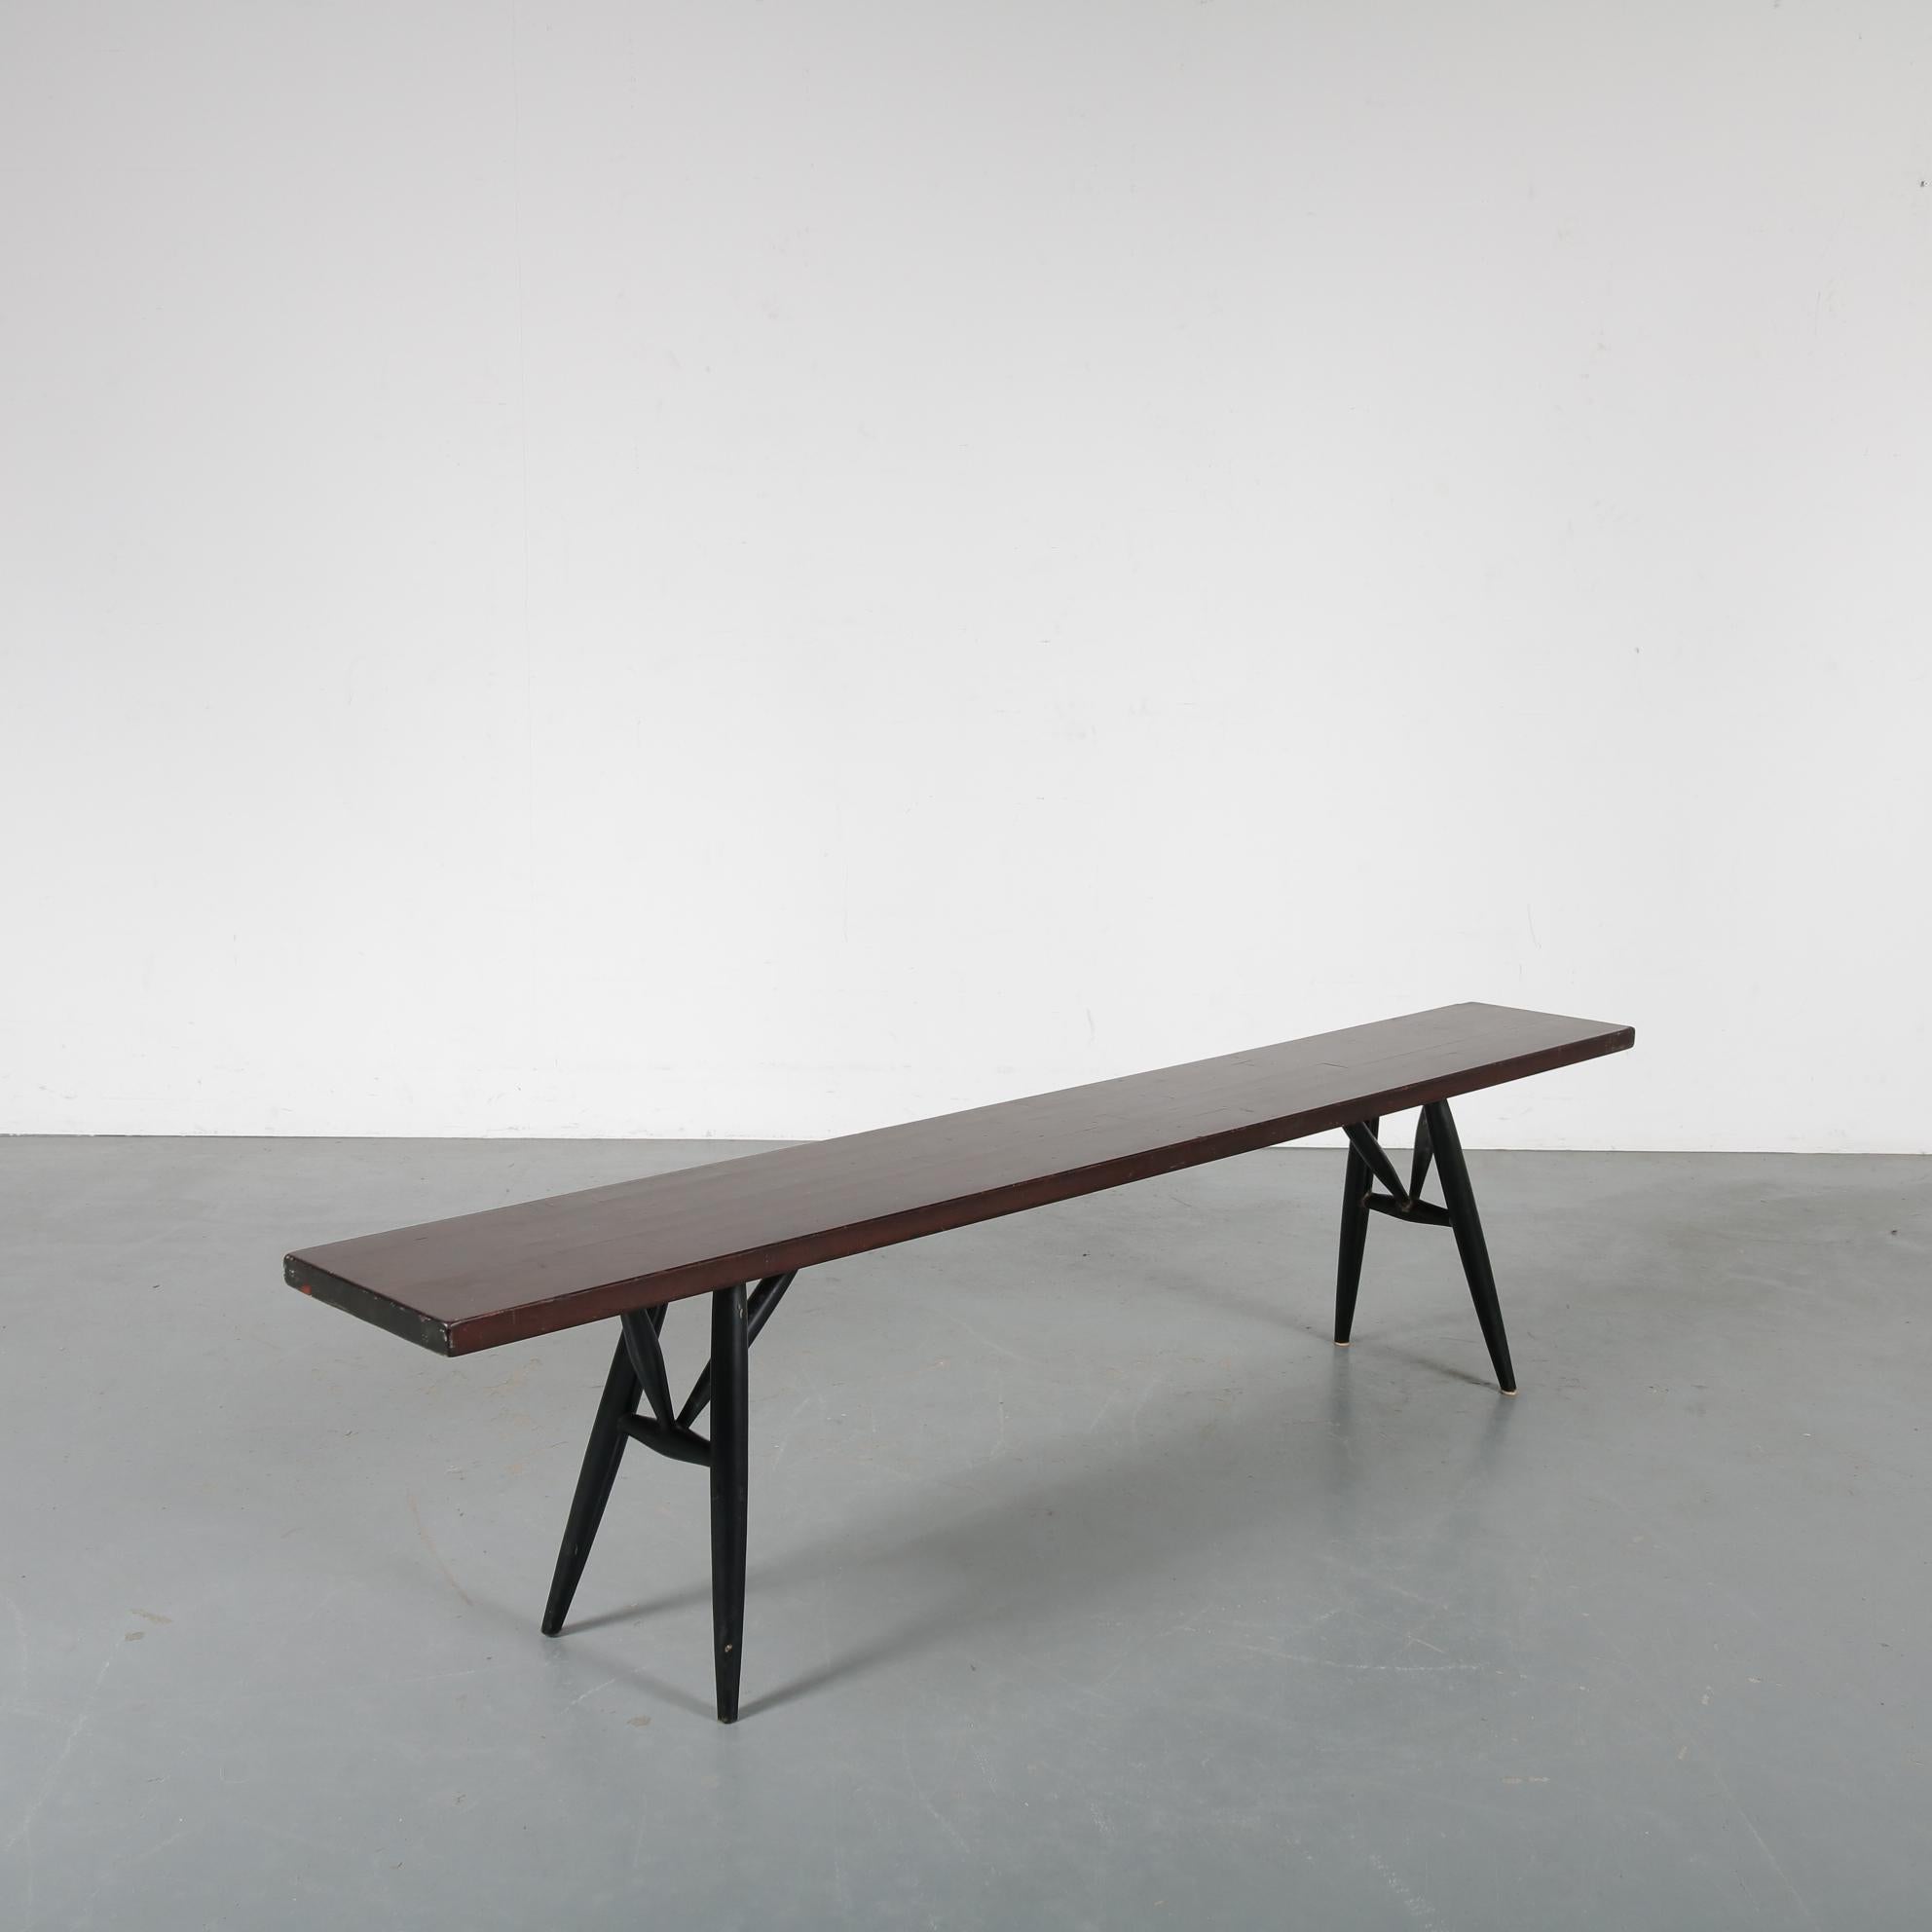 A wonderful bench from the “Pirkka” series, designed by Ilmari Tapiovaara and manufactured by Laukaan Puu, circa 1950.

The narrow rectangular top / seat of the bench are made of dark stained pine wood and it has a black lacquered wooden base.